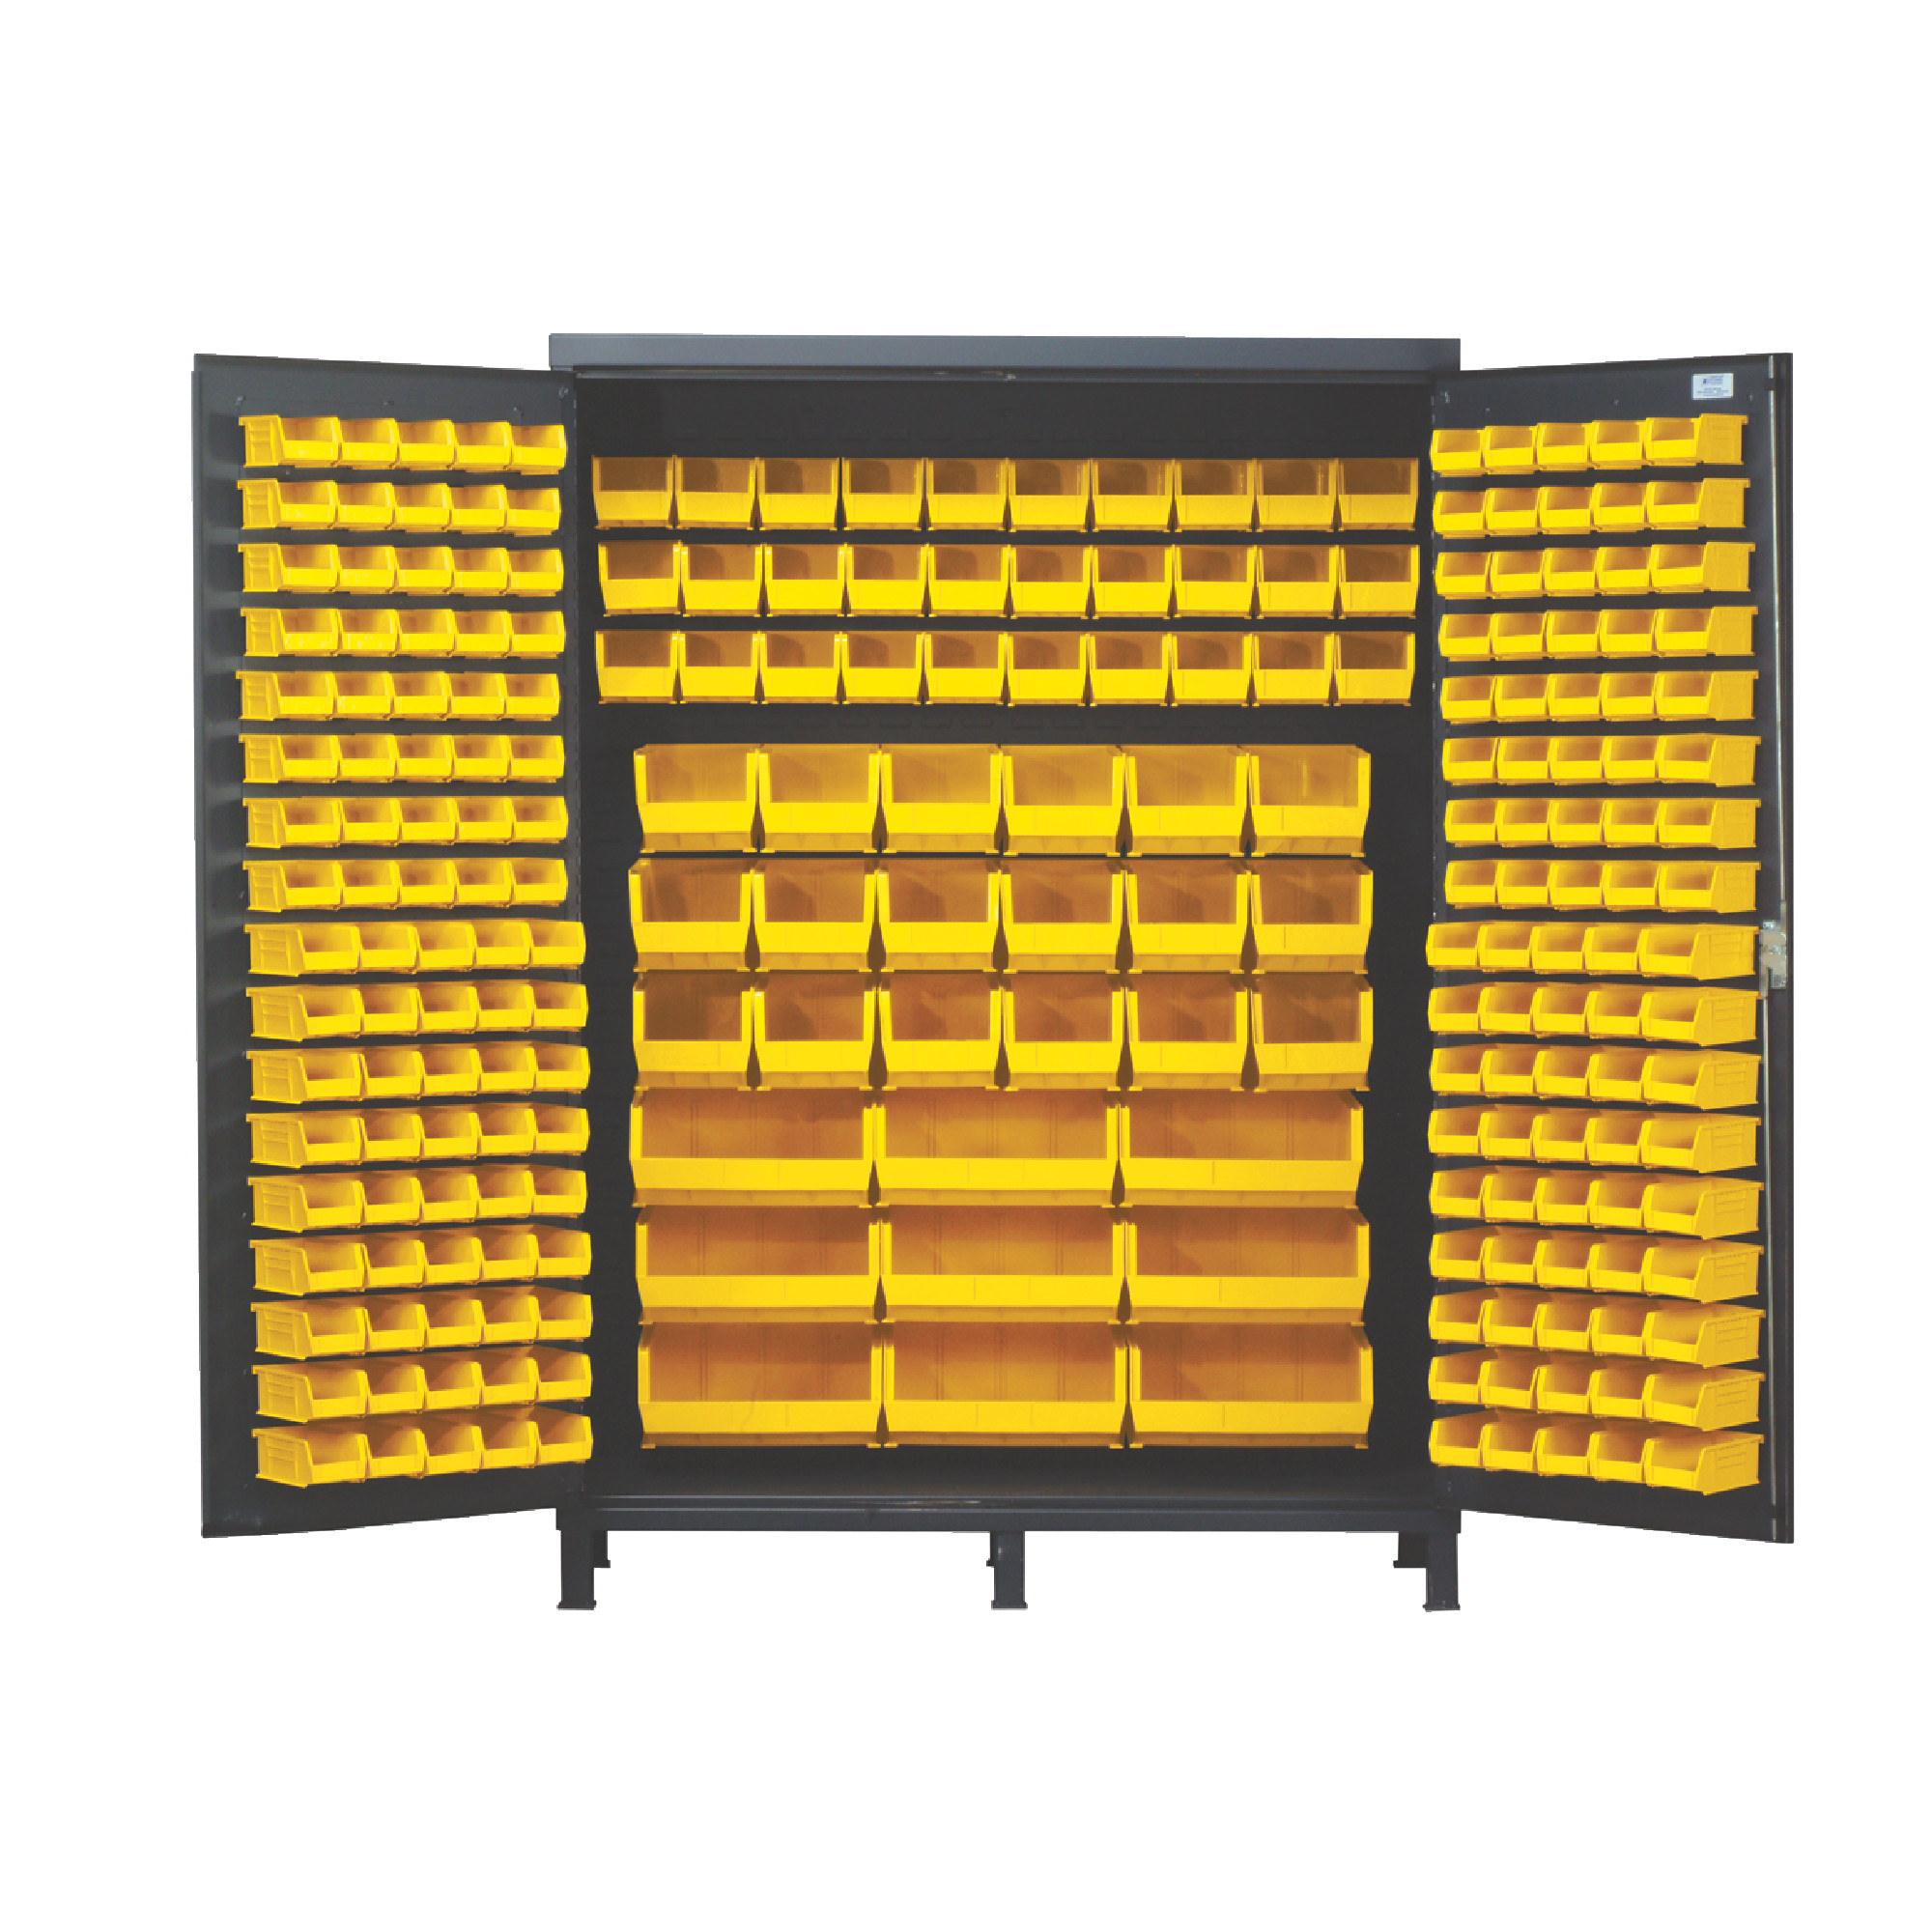 QUANTUM STORAGE SYSTEMS 60" Super Wide Colossal Heavy-Duty Floor Cabinet With 227 Yellow Bins